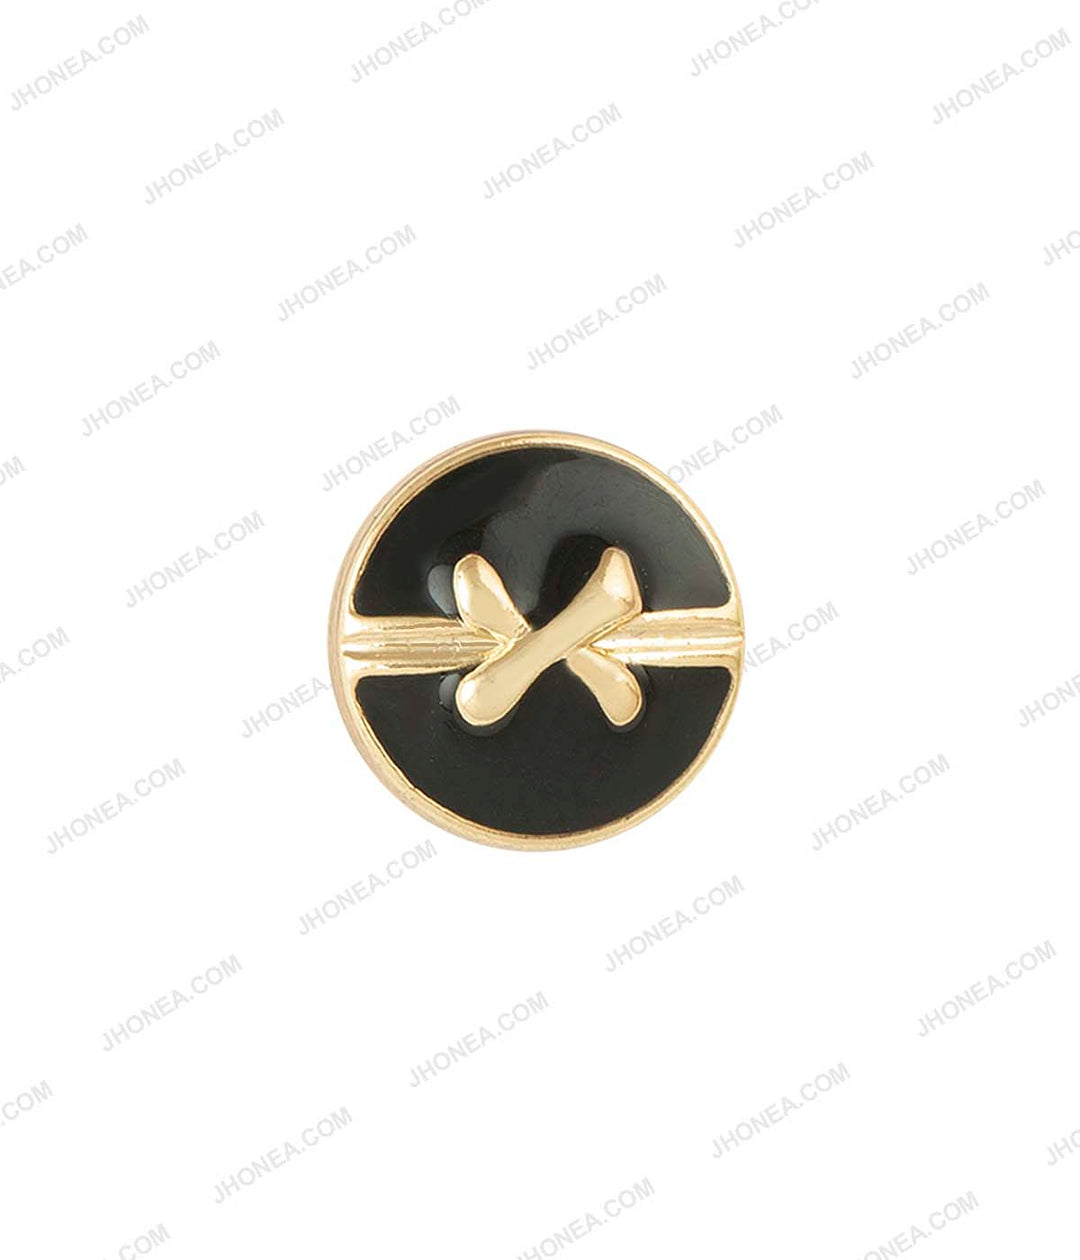 Black Enamel Shiny Gold Bow Design Surface Buttons for Shirts